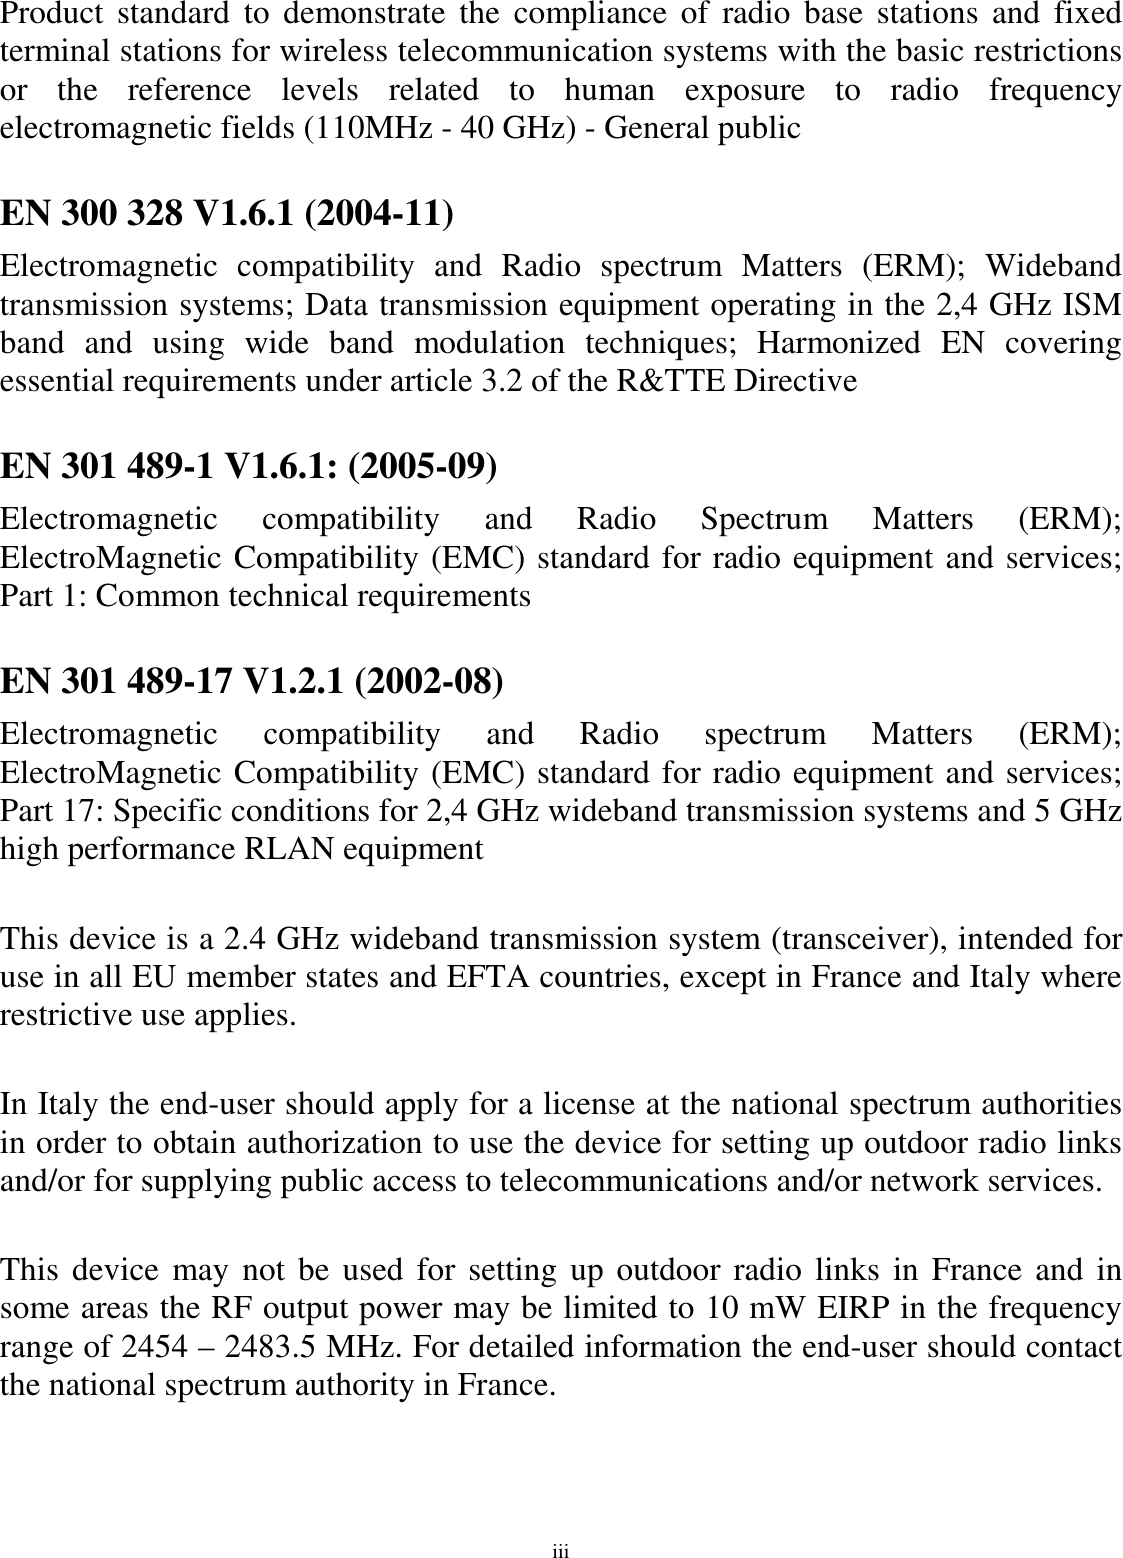 iii Product  standard  to  demonstrate  the  compliance  of  radio  base  stations  and  fixed terminal stations for wireless telecommunication systems with the basic restrictions or  the  reference  levels  related  to  human  exposure  to  radio  frequency electromagnetic fields (110MHz - 40 GHz) - General public  EN 300 328 V1.6.1 (2004-11) Electromagnetic  compatibility  and  Radio  spectrum  Matters  (ERM);  Wideband transmission systems; Data transmission equipment operating in the 2,4 GHz ISM band  and  using  wide  band  modulation  techniques;  Harmonized  EN  covering essential requirements under article 3.2 of the R&amp;TTE Directive  EN 301 489-1 V1.6.1: (2005-09) Electromagnetic  compatibility  and  Radio  Spectrum  Matters  (ERM); ElectroMagnetic Compatibility (EMC) standard for radio equipment and services; Part 1: Common technical requirements  EN 301 489-17 V1.2.1 (2002-08)  Electromagnetic  compatibility  and  Radio  spectrum  Matters  (ERM); ElectroMagnetic Compatibility (EMC) standard for radio equipment and services; Part 17: Specific conditions for 2,4 GHz wideband transmission systems and 5 GHz high performance RLAN equipment  This device is a 2.4 GHz wideband transmission system (transceiver), intended for use in all EU member states and EFTA countries, except in France and Italy where restrictive use applies.  In Italy the end-user should apply for a license at the national spectrum authorities in order to obtain authorization to use the device for setting up outdoor radio links and/or for supplying public access to telecommunications and/or network services.  This device may not be used for setting  up outdoor radio links in France  and in some areas the RF output power may be limited to 10 mW EIRP in the frequency range of 2454 – 2483.5 MHz. For detailed information the end-user should contact the national spectrum authority in France.  